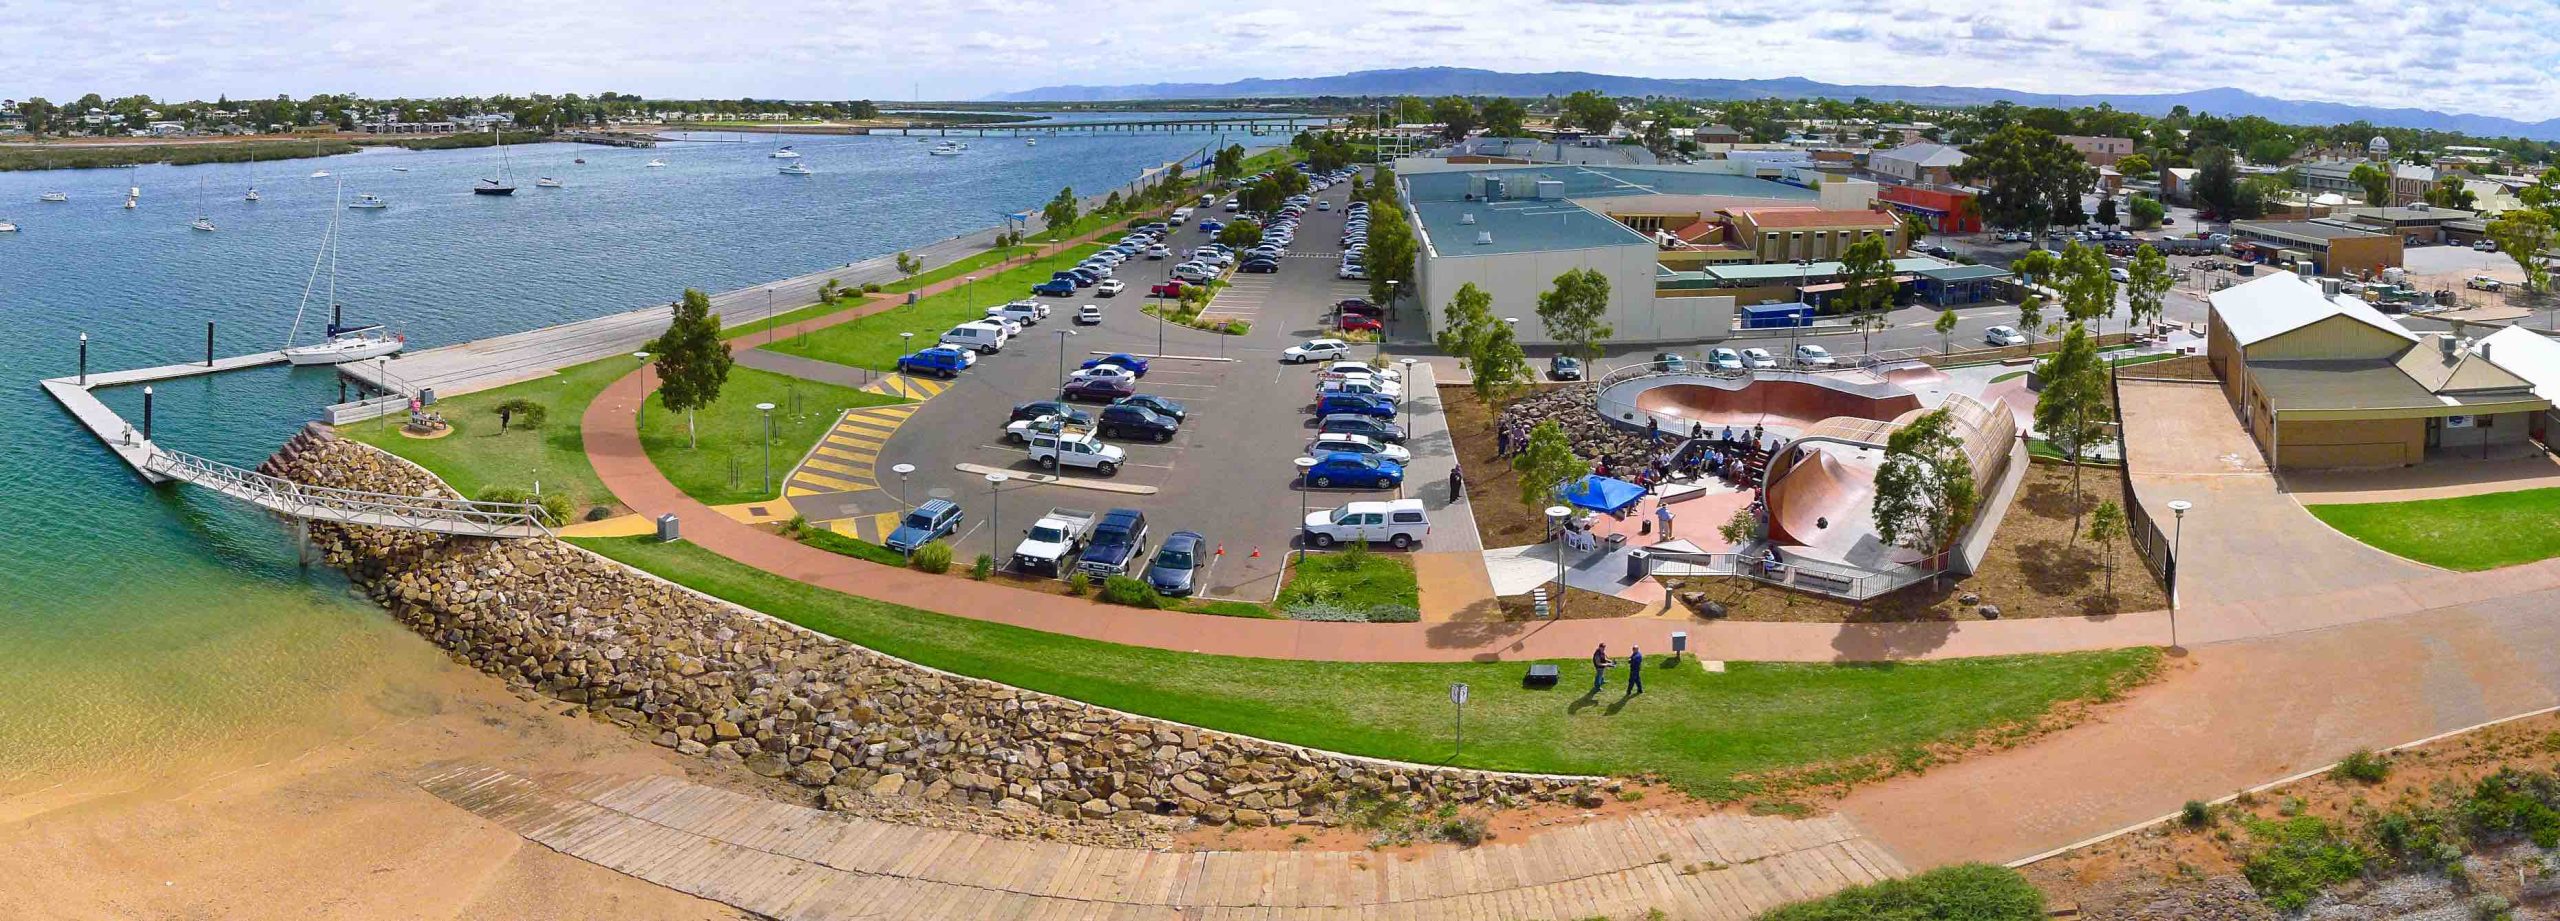 Port Augusta - Move to More